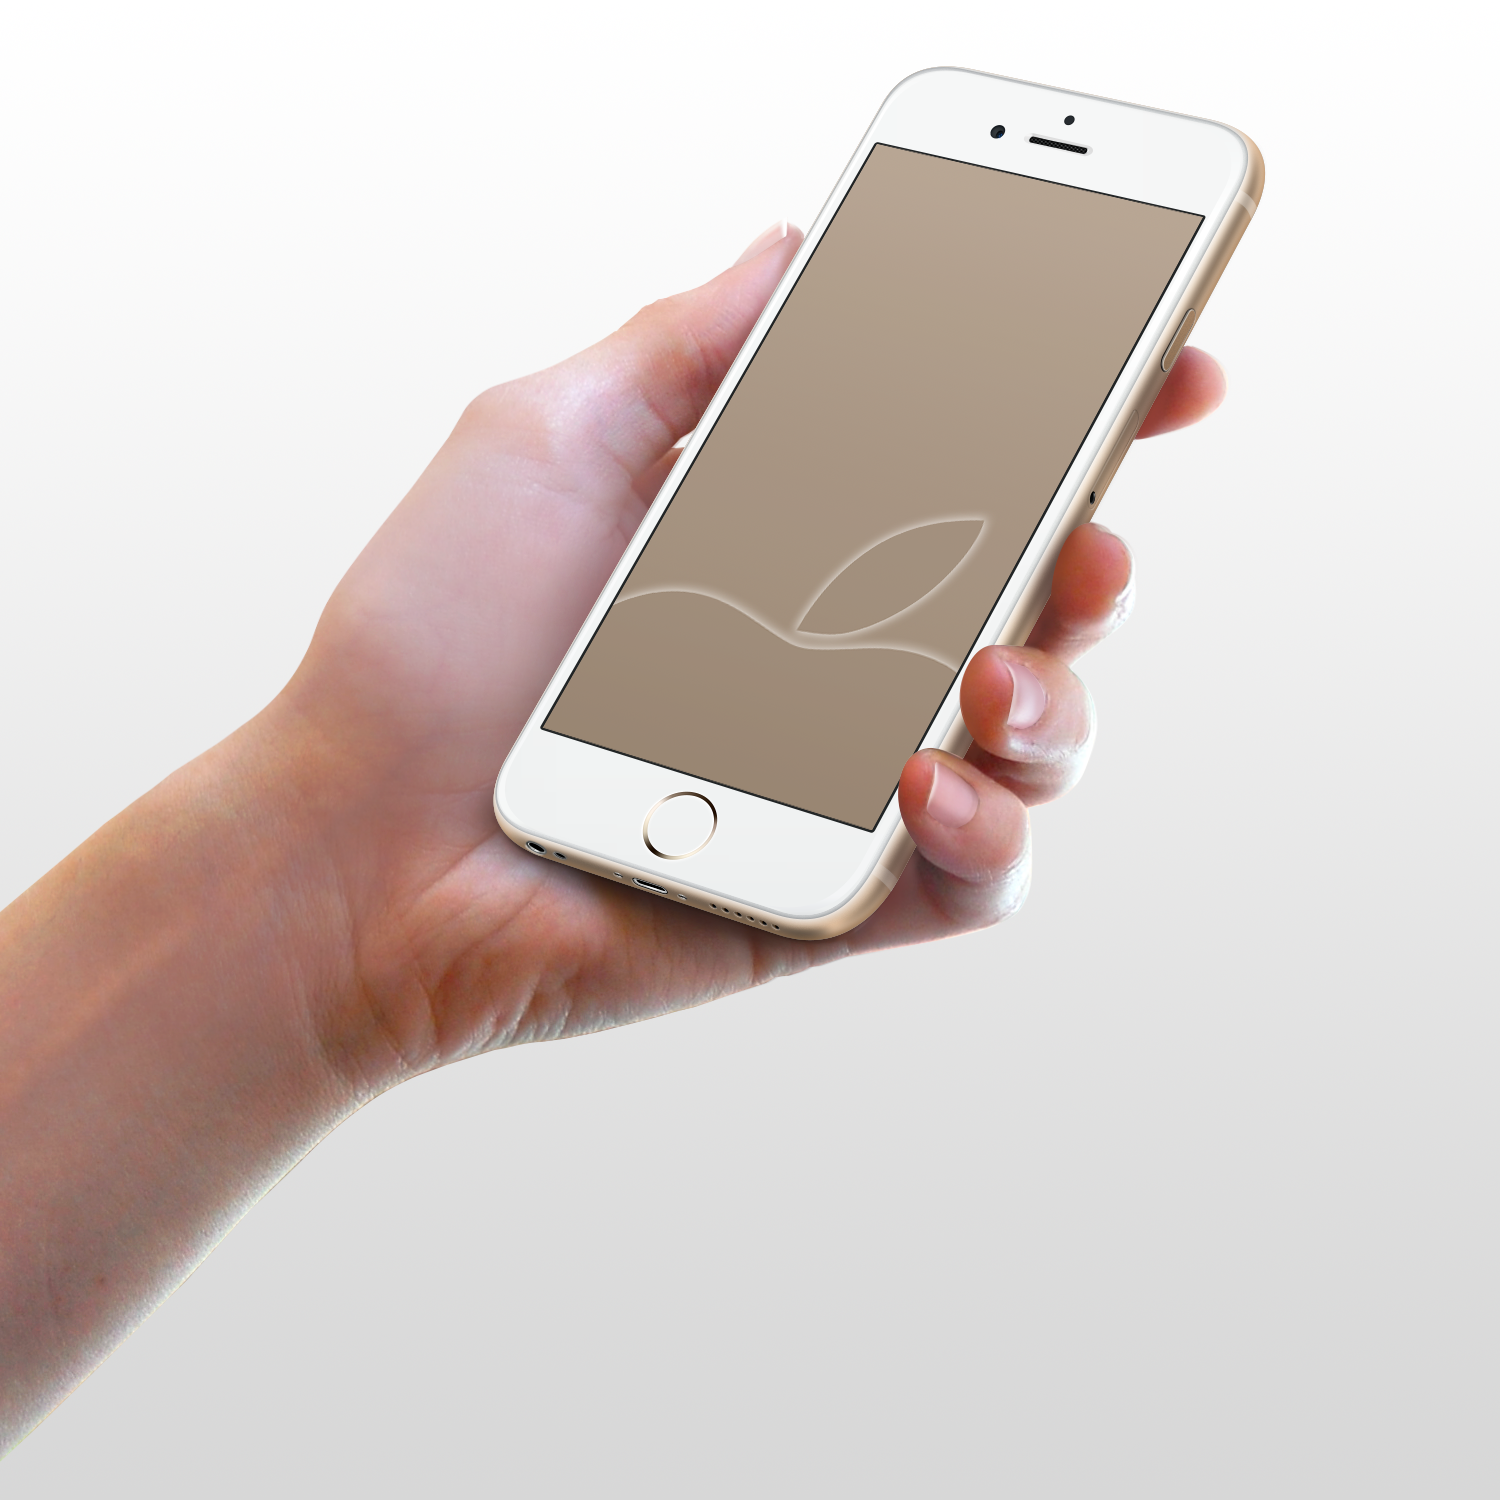 Gold Wallpaper for iPhone 6 and 6 Plus by kiwimanjaro on